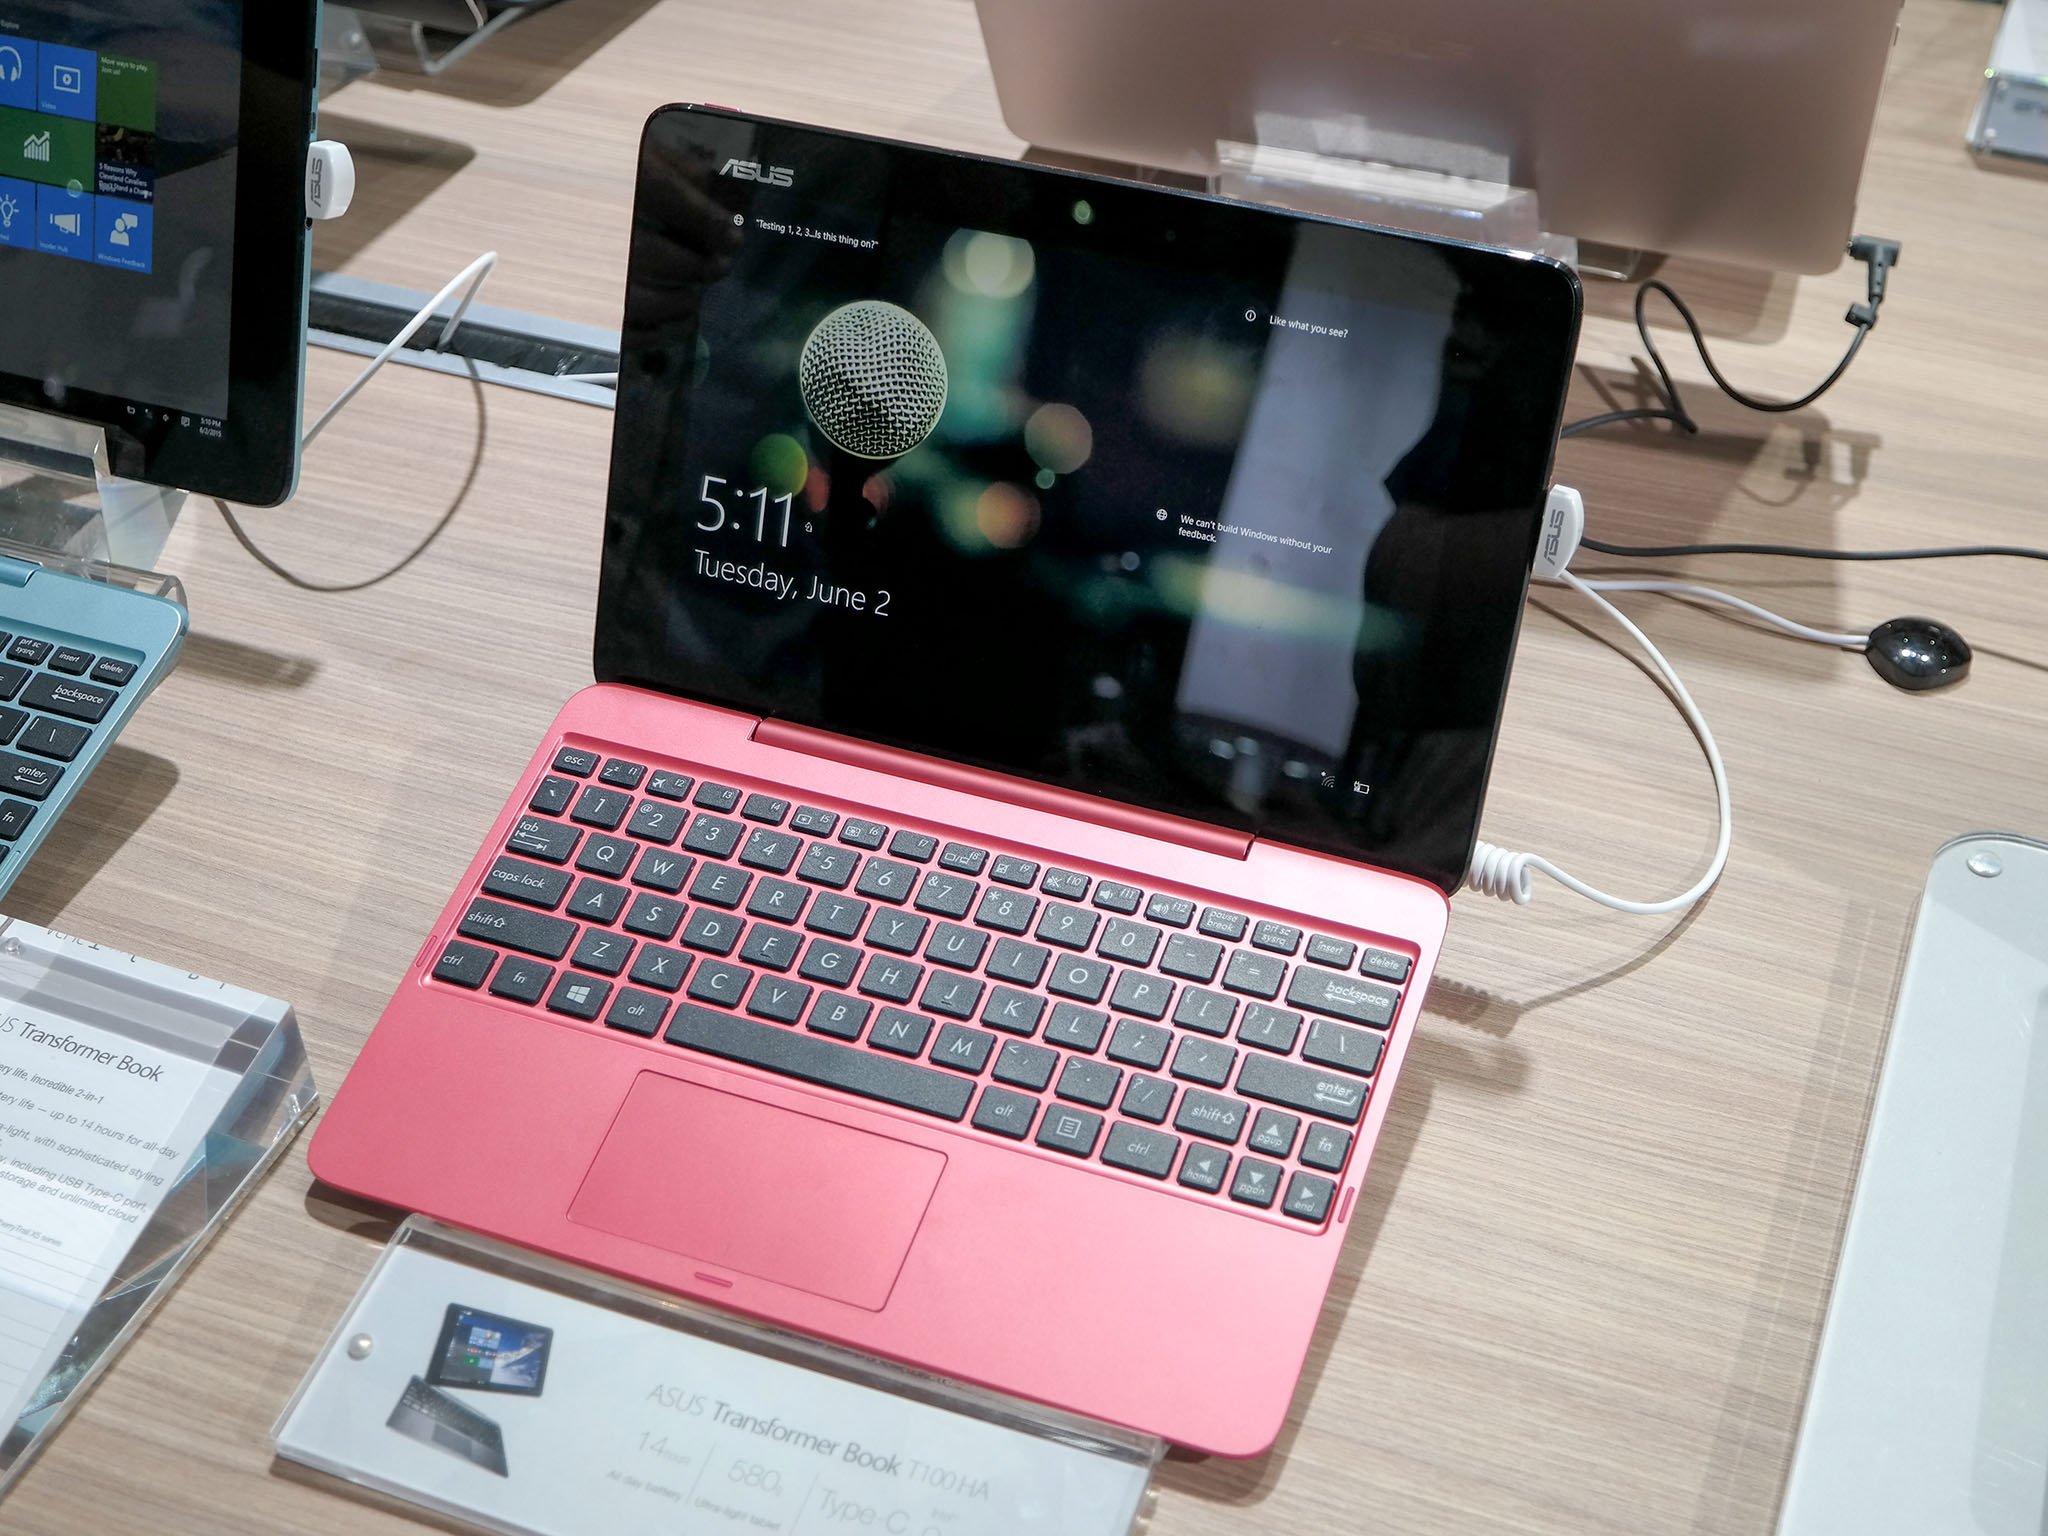 New ASUS Transformer Book T100HA will launch in the UK on September 30